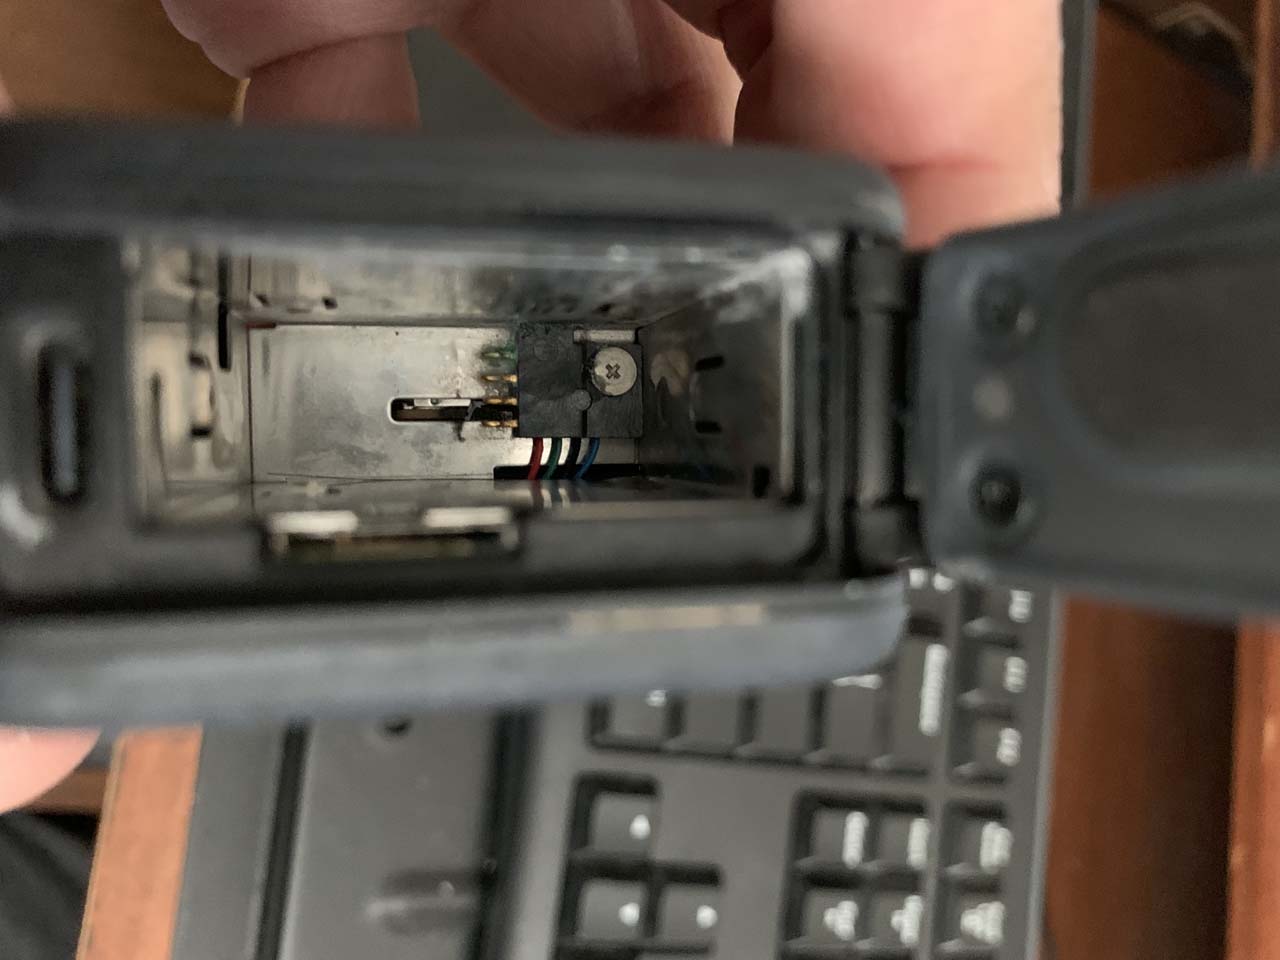 Looking inside the battery compartment of my GoPro HERO 9 Black that had been water damaged during use while snorkeling